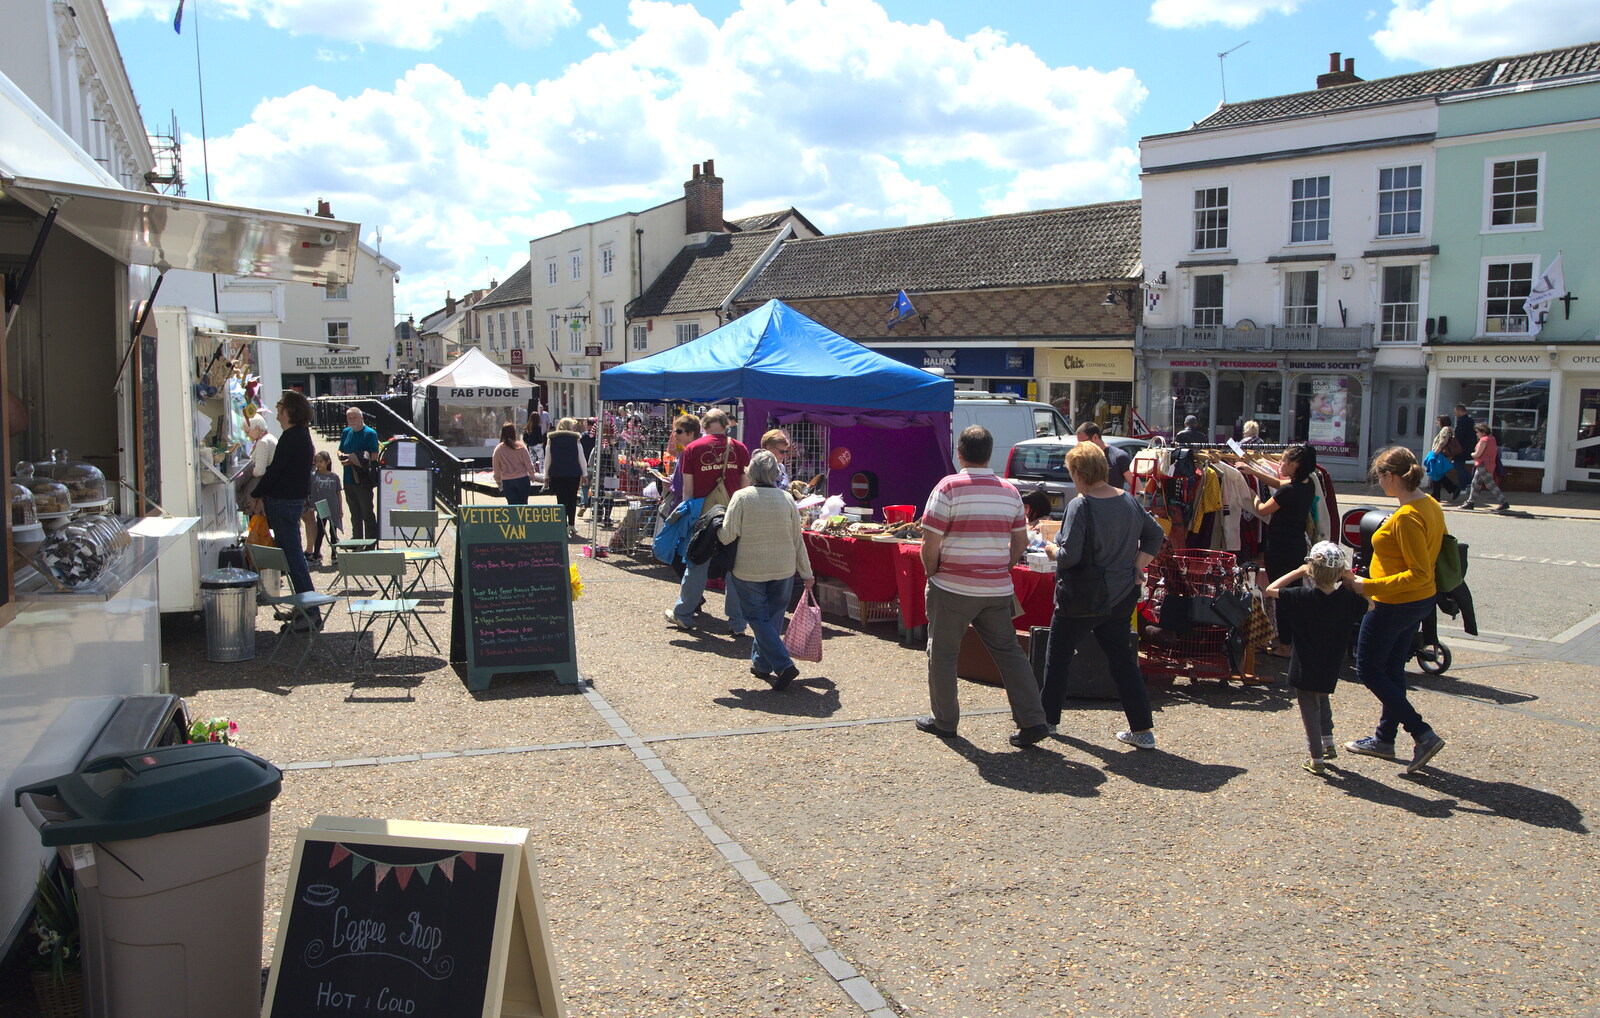 Diss market place from The Diss Organ Festival, Diss, Norfolk - 14th May 2017